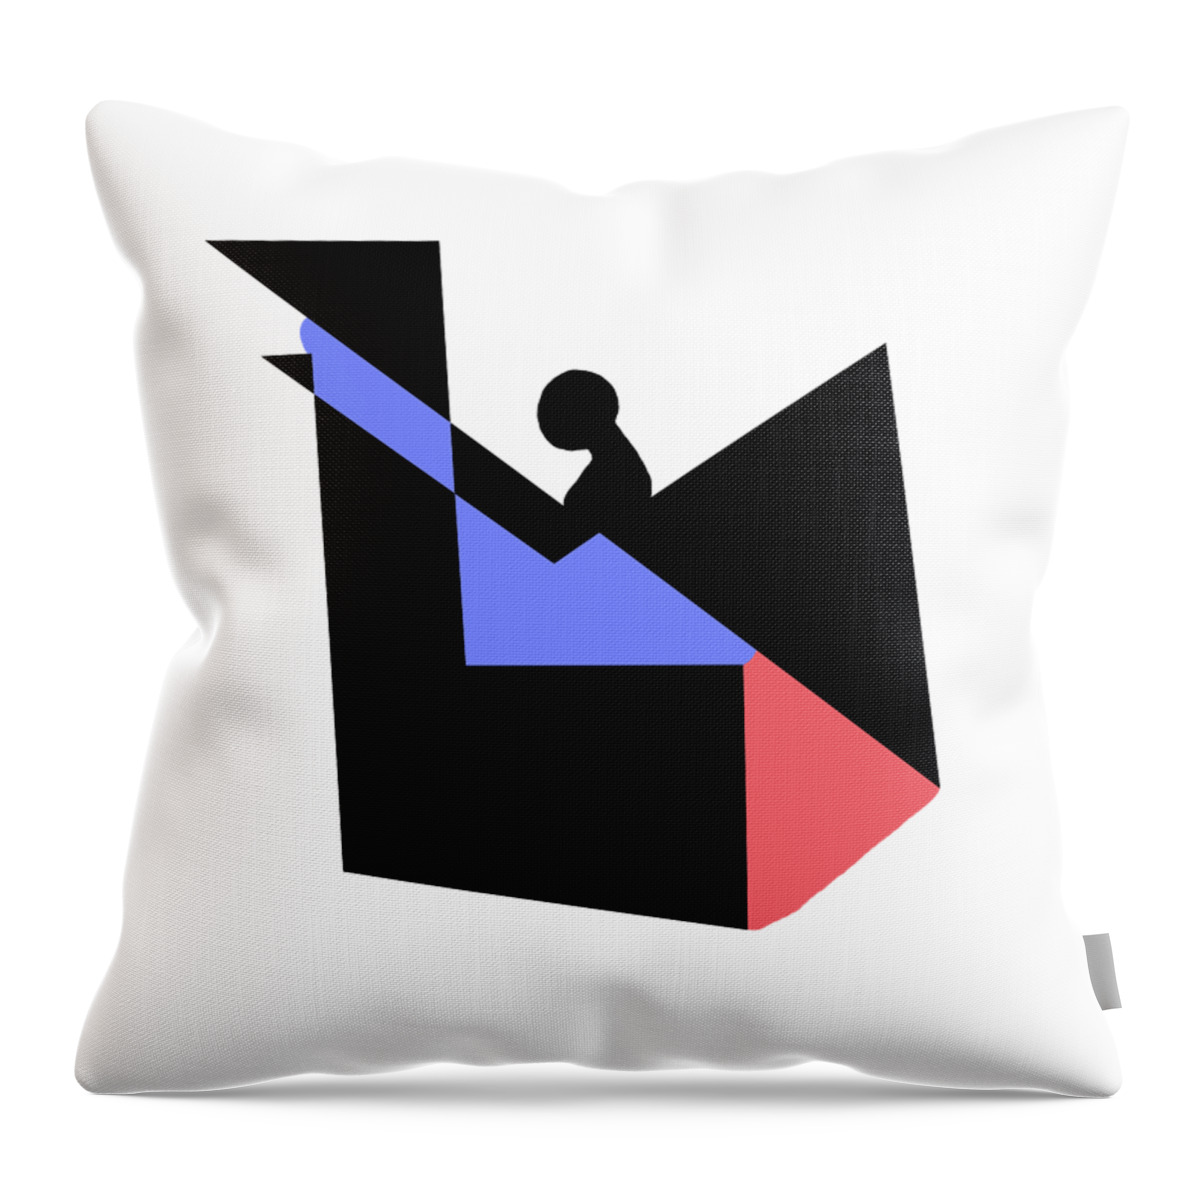 Abstract In The Living Room Throw Pillow featuring the digital art Escalator by David Bridburg